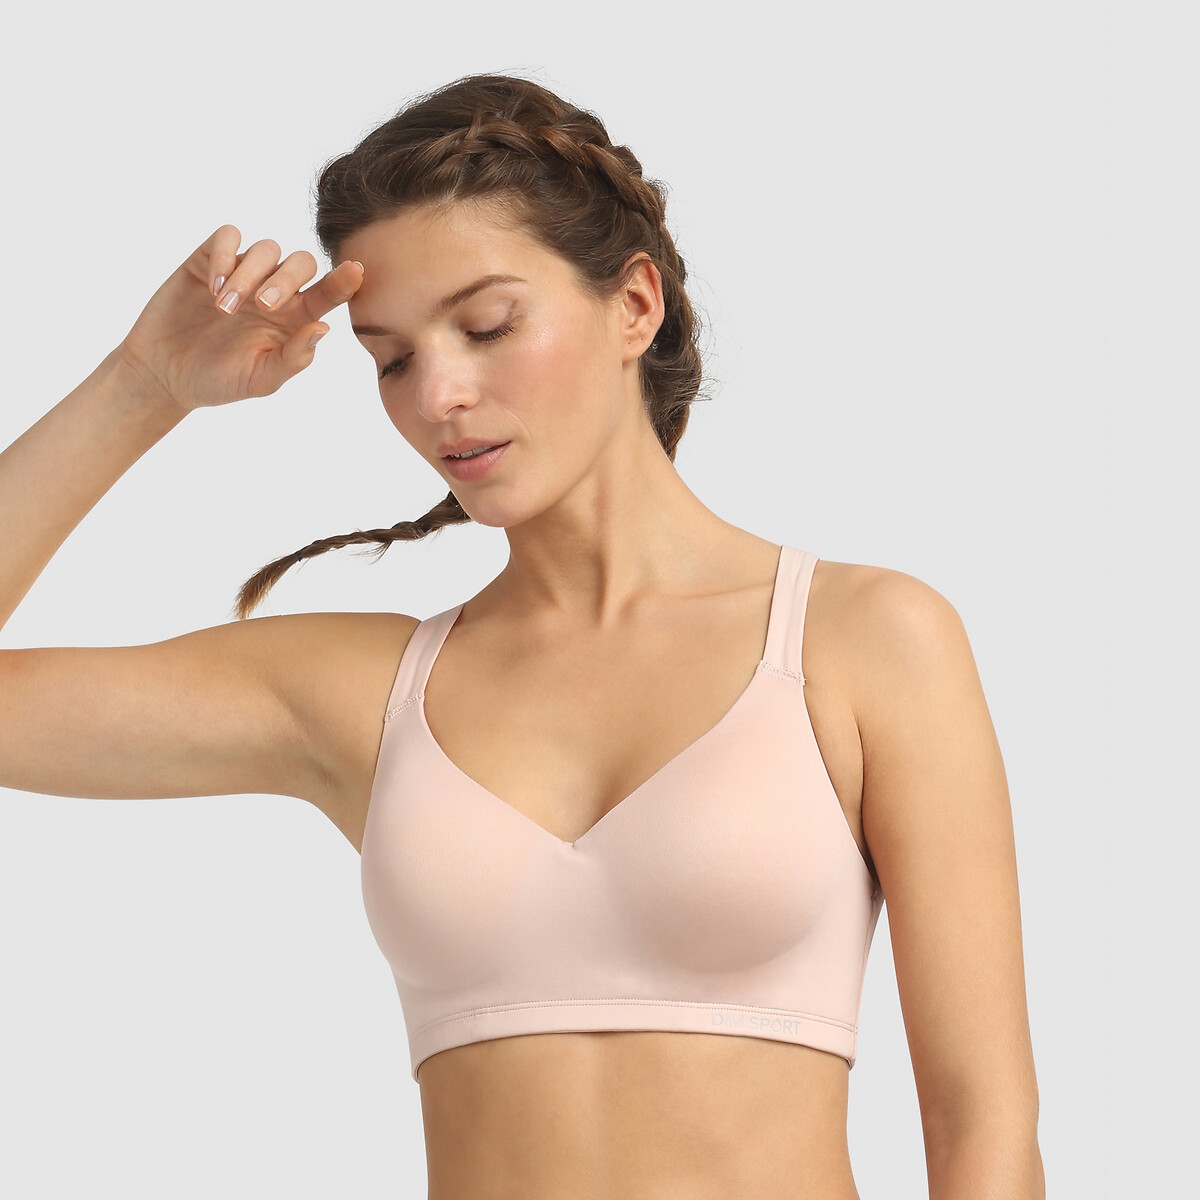 Padded Sports Bra for Moderate Impact